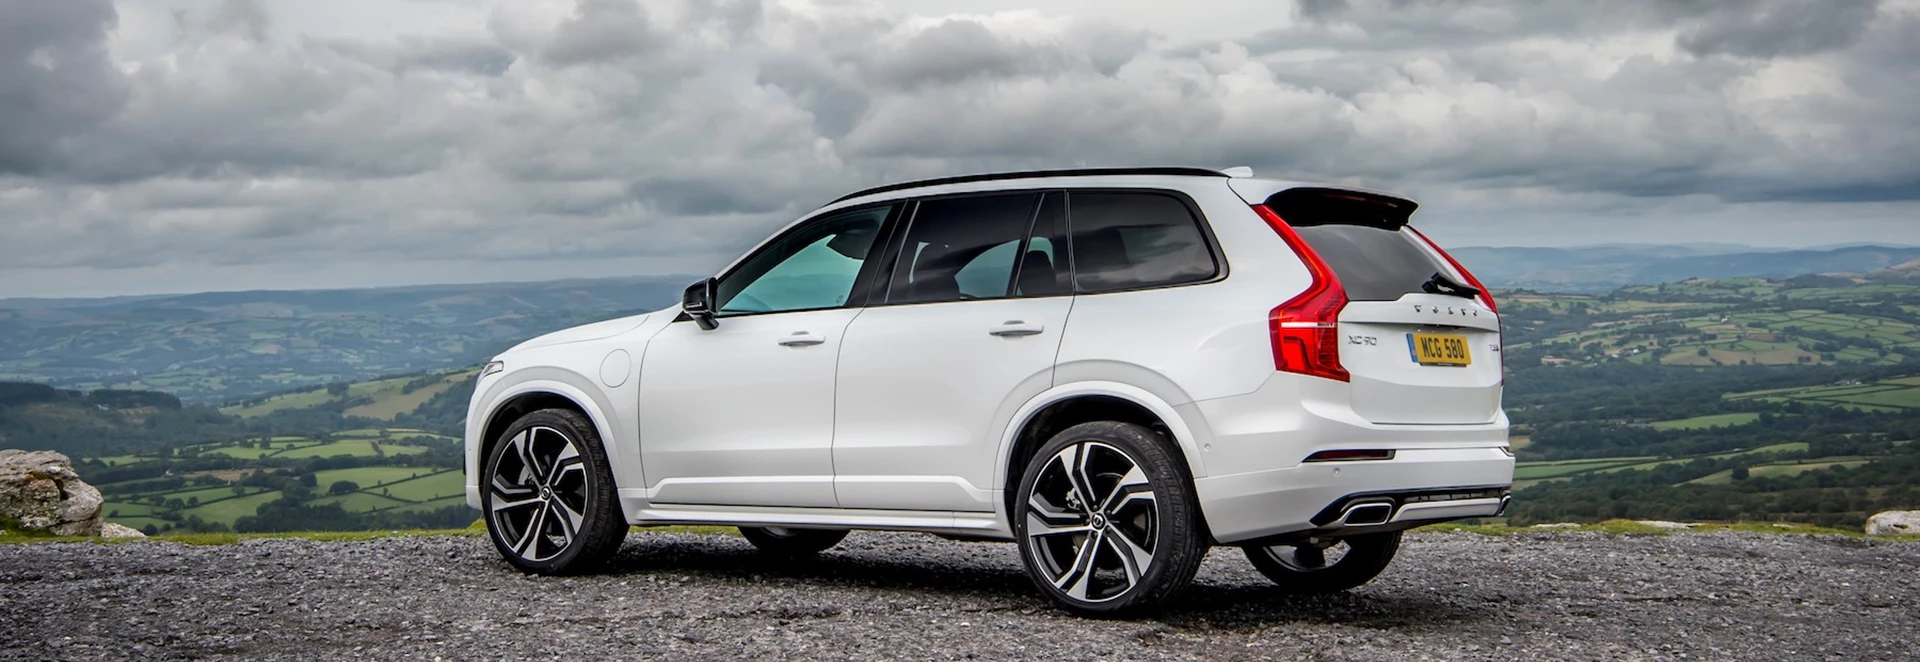 Volvo announces free electricity offer to plug-in hybrid customers